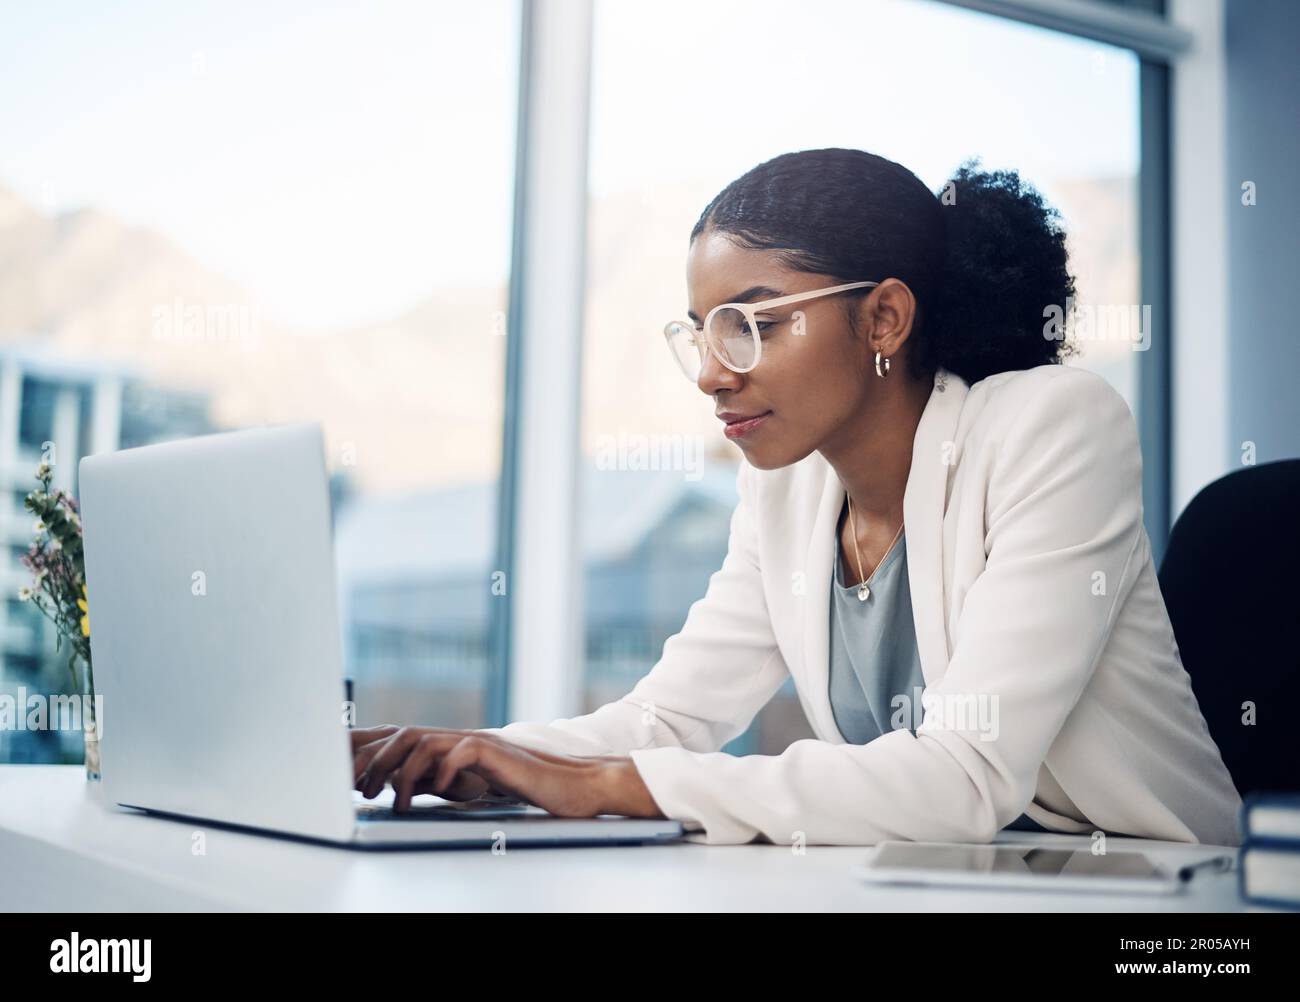 True ambition cant be broken. a young businesswoman using a laptop at her desk in a modern office. Stock Photo